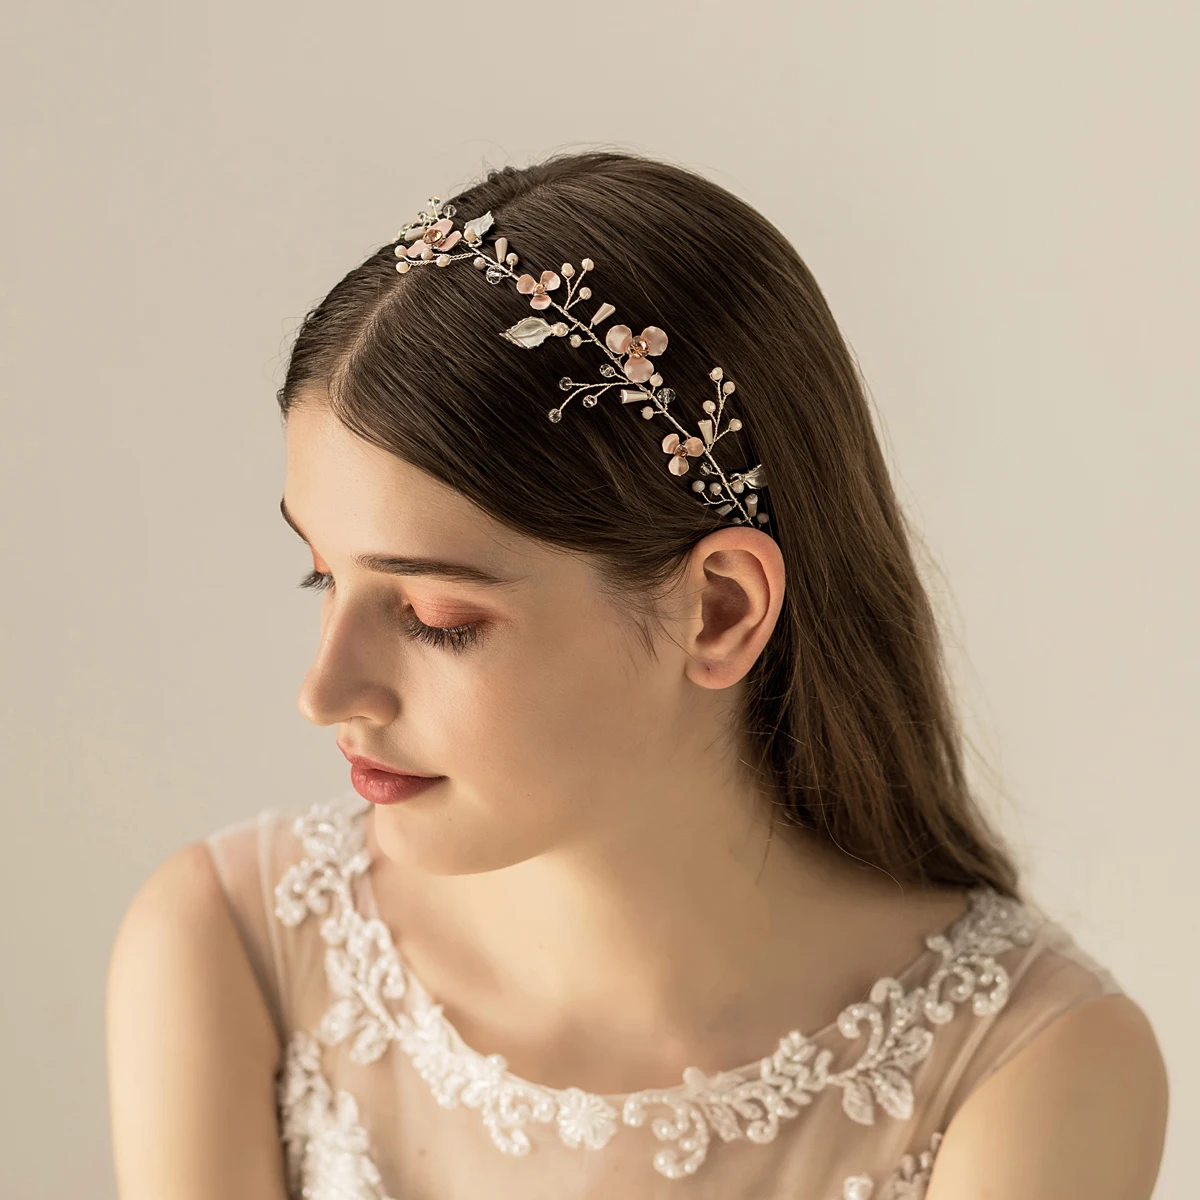 

O541 Exquisite Wedding Bridal Headband Alloy Leaves Crystal Pearls Handmade Brides Bridesmaid Women Pageant Prom Headpiece